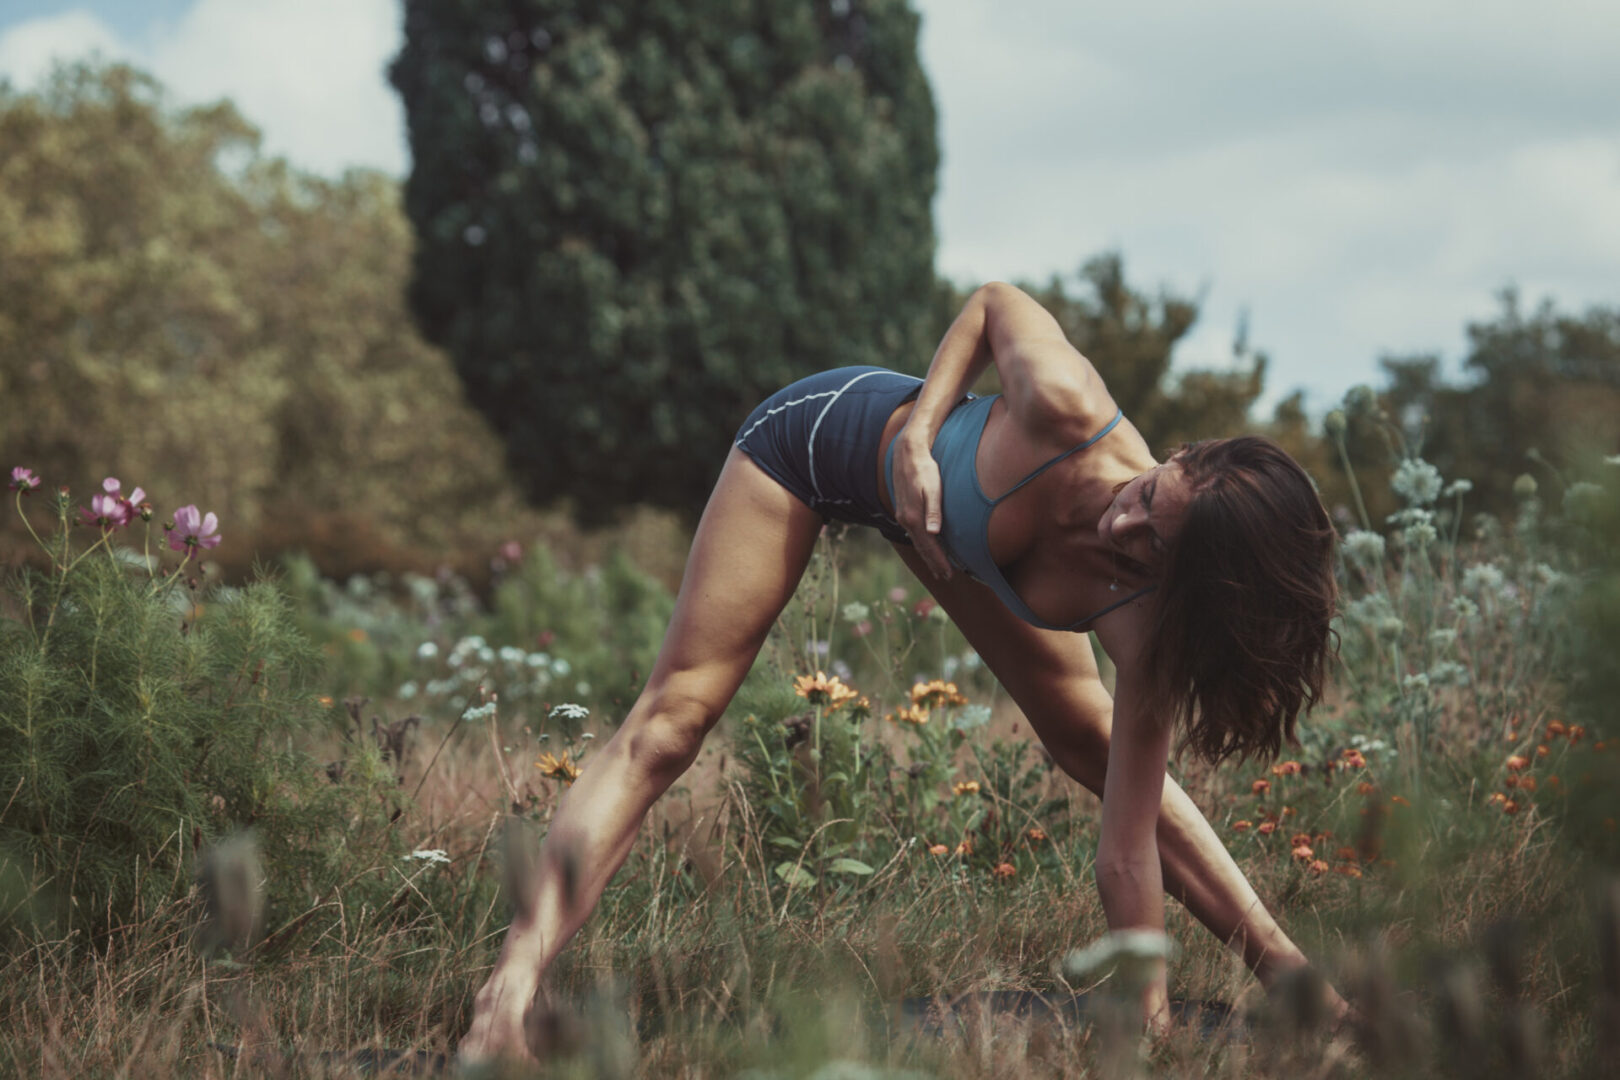 A woman in shorts and top doing yoga on grass.